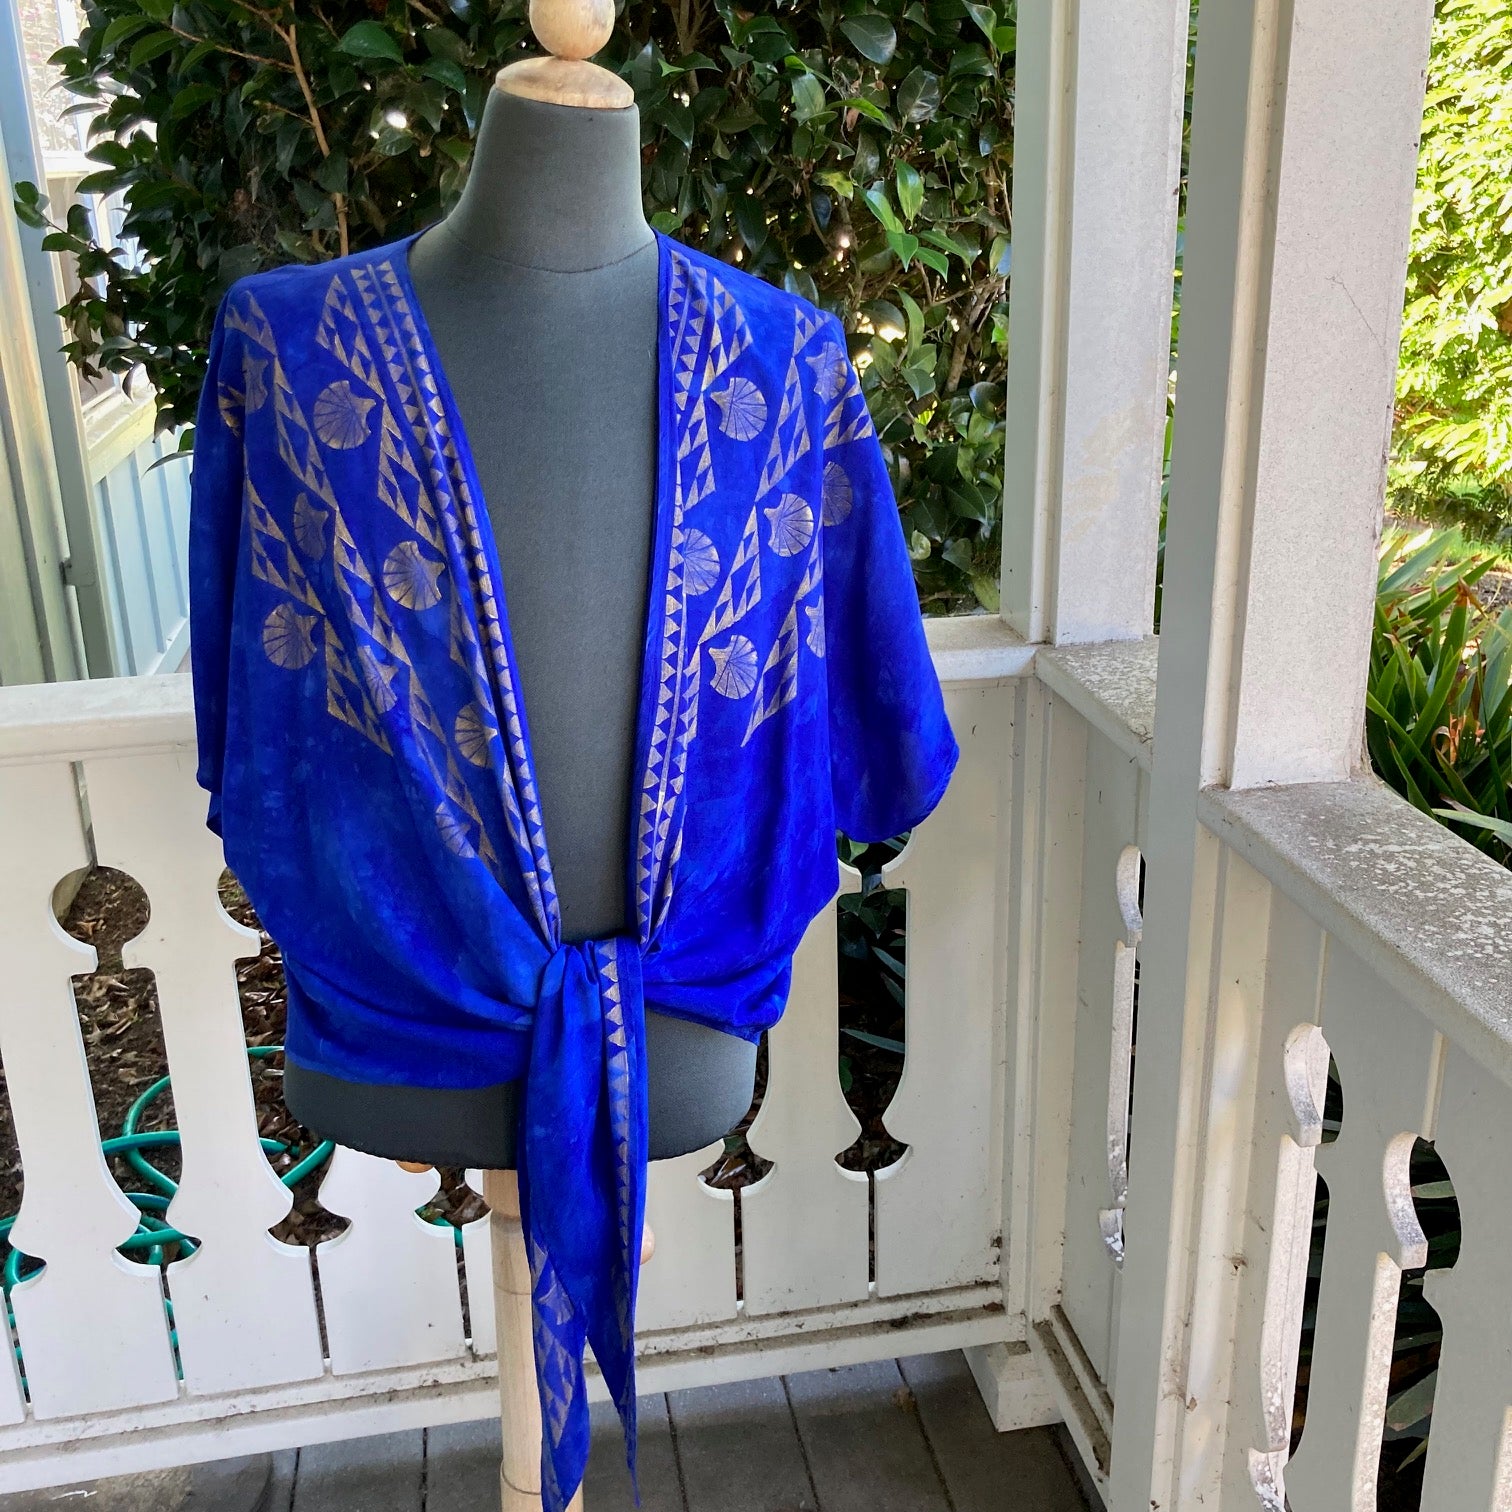 Ohe Kapala TIE Blouse in Royal Blue with Mauna and Lehua